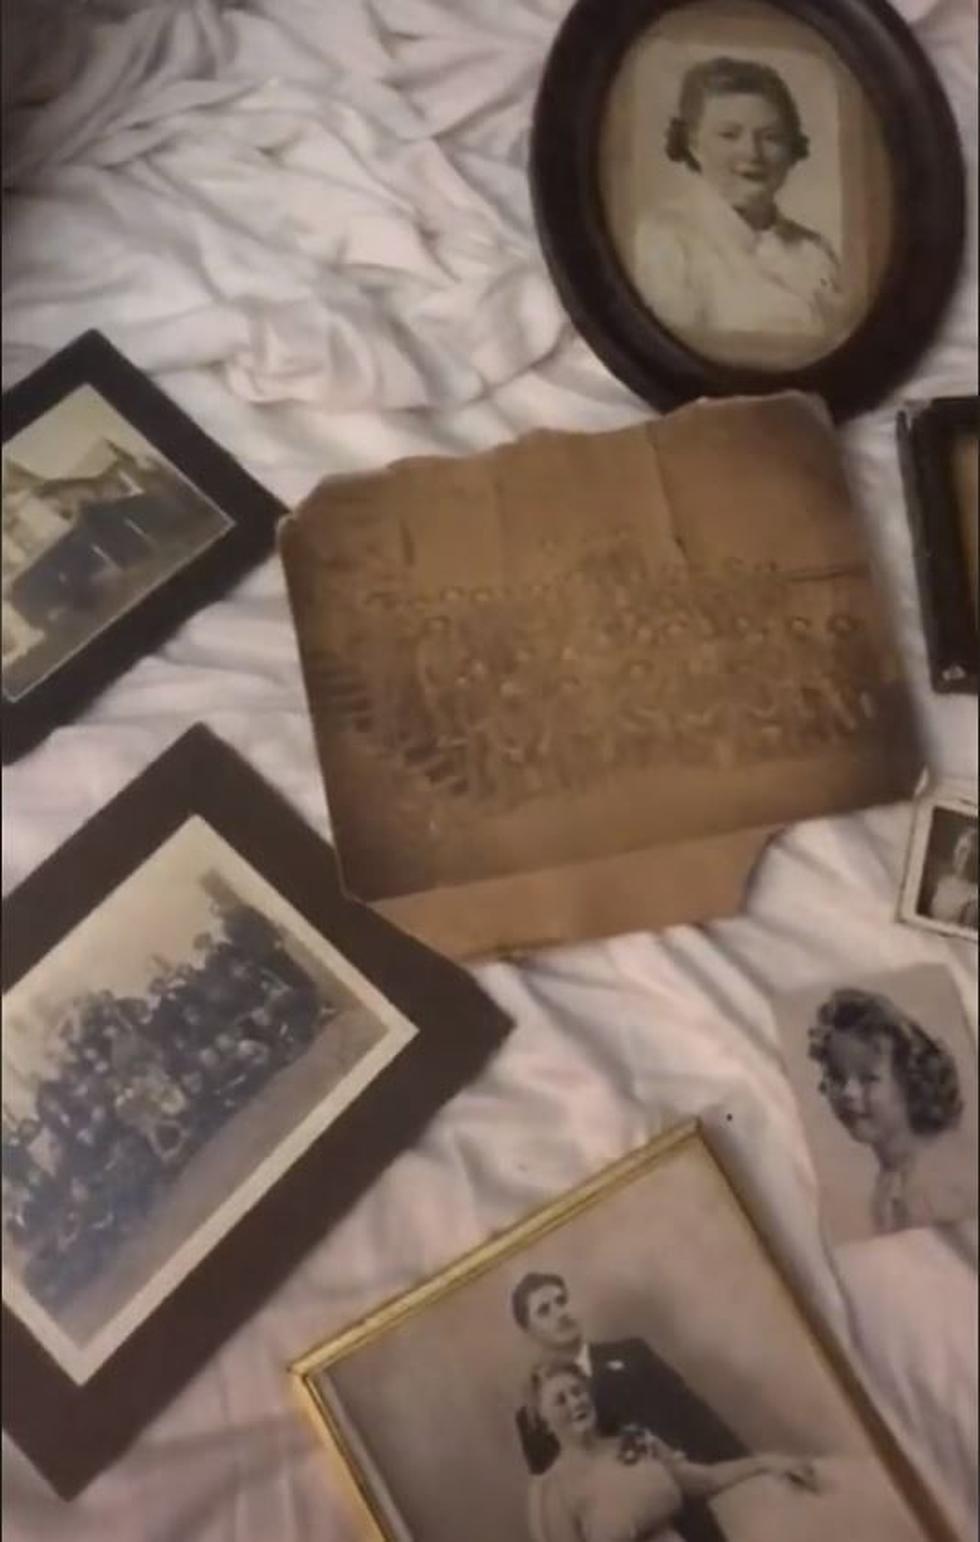 Mysterious Items Found in 174-Year-Old West Michigan Home